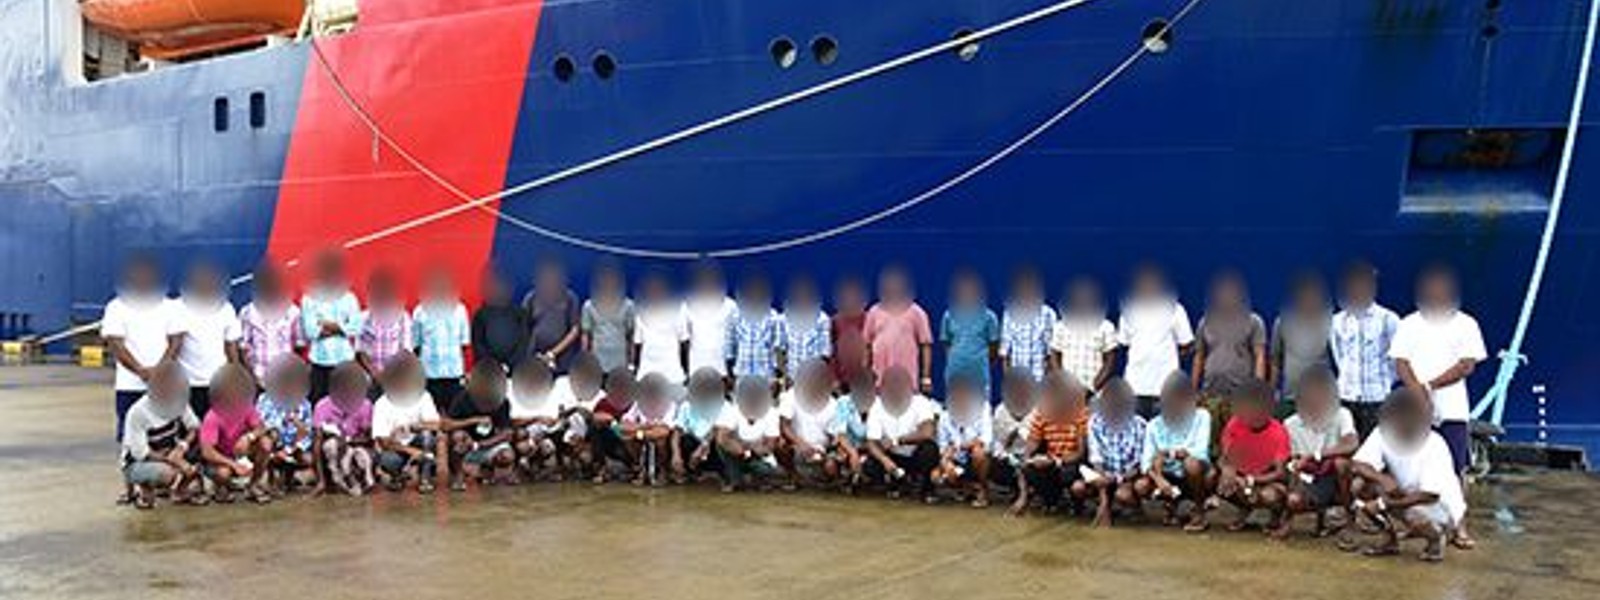 46 illegal immigrants returned by Australian Border Force to SL